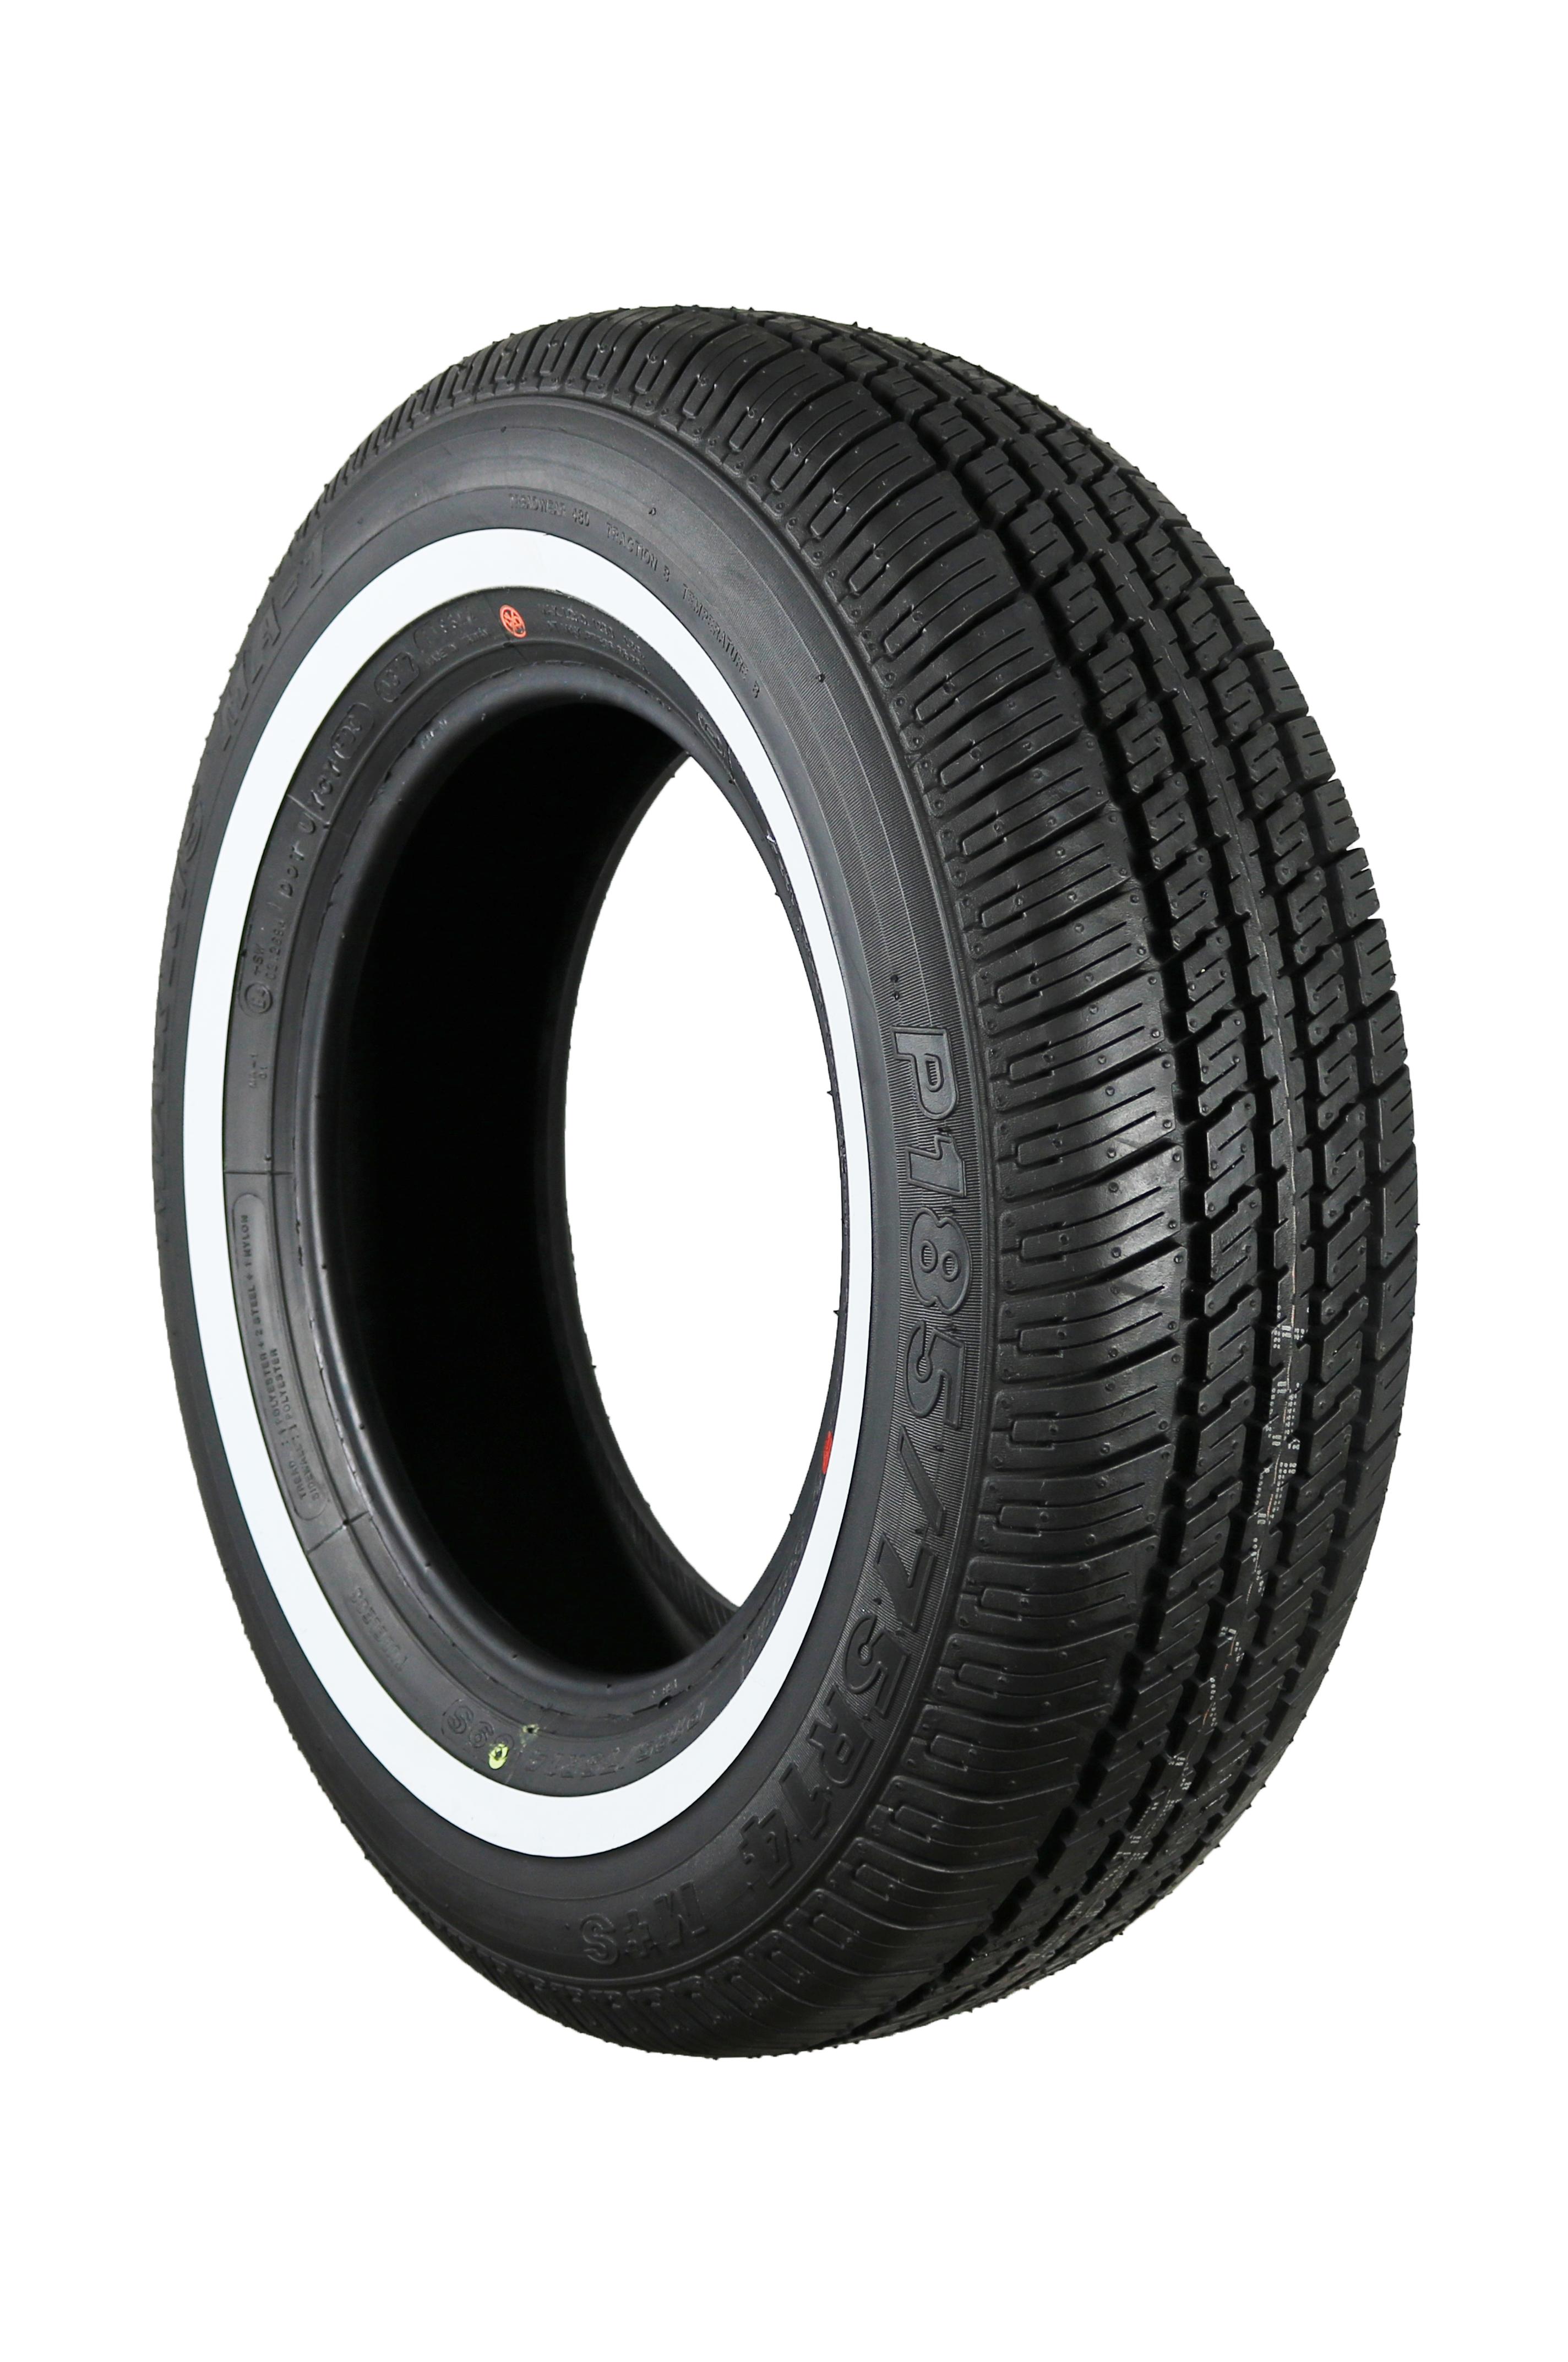 Vintage Tyres Maxxis WSW Classic | MA-1 & 22mm 89S 185/75R14